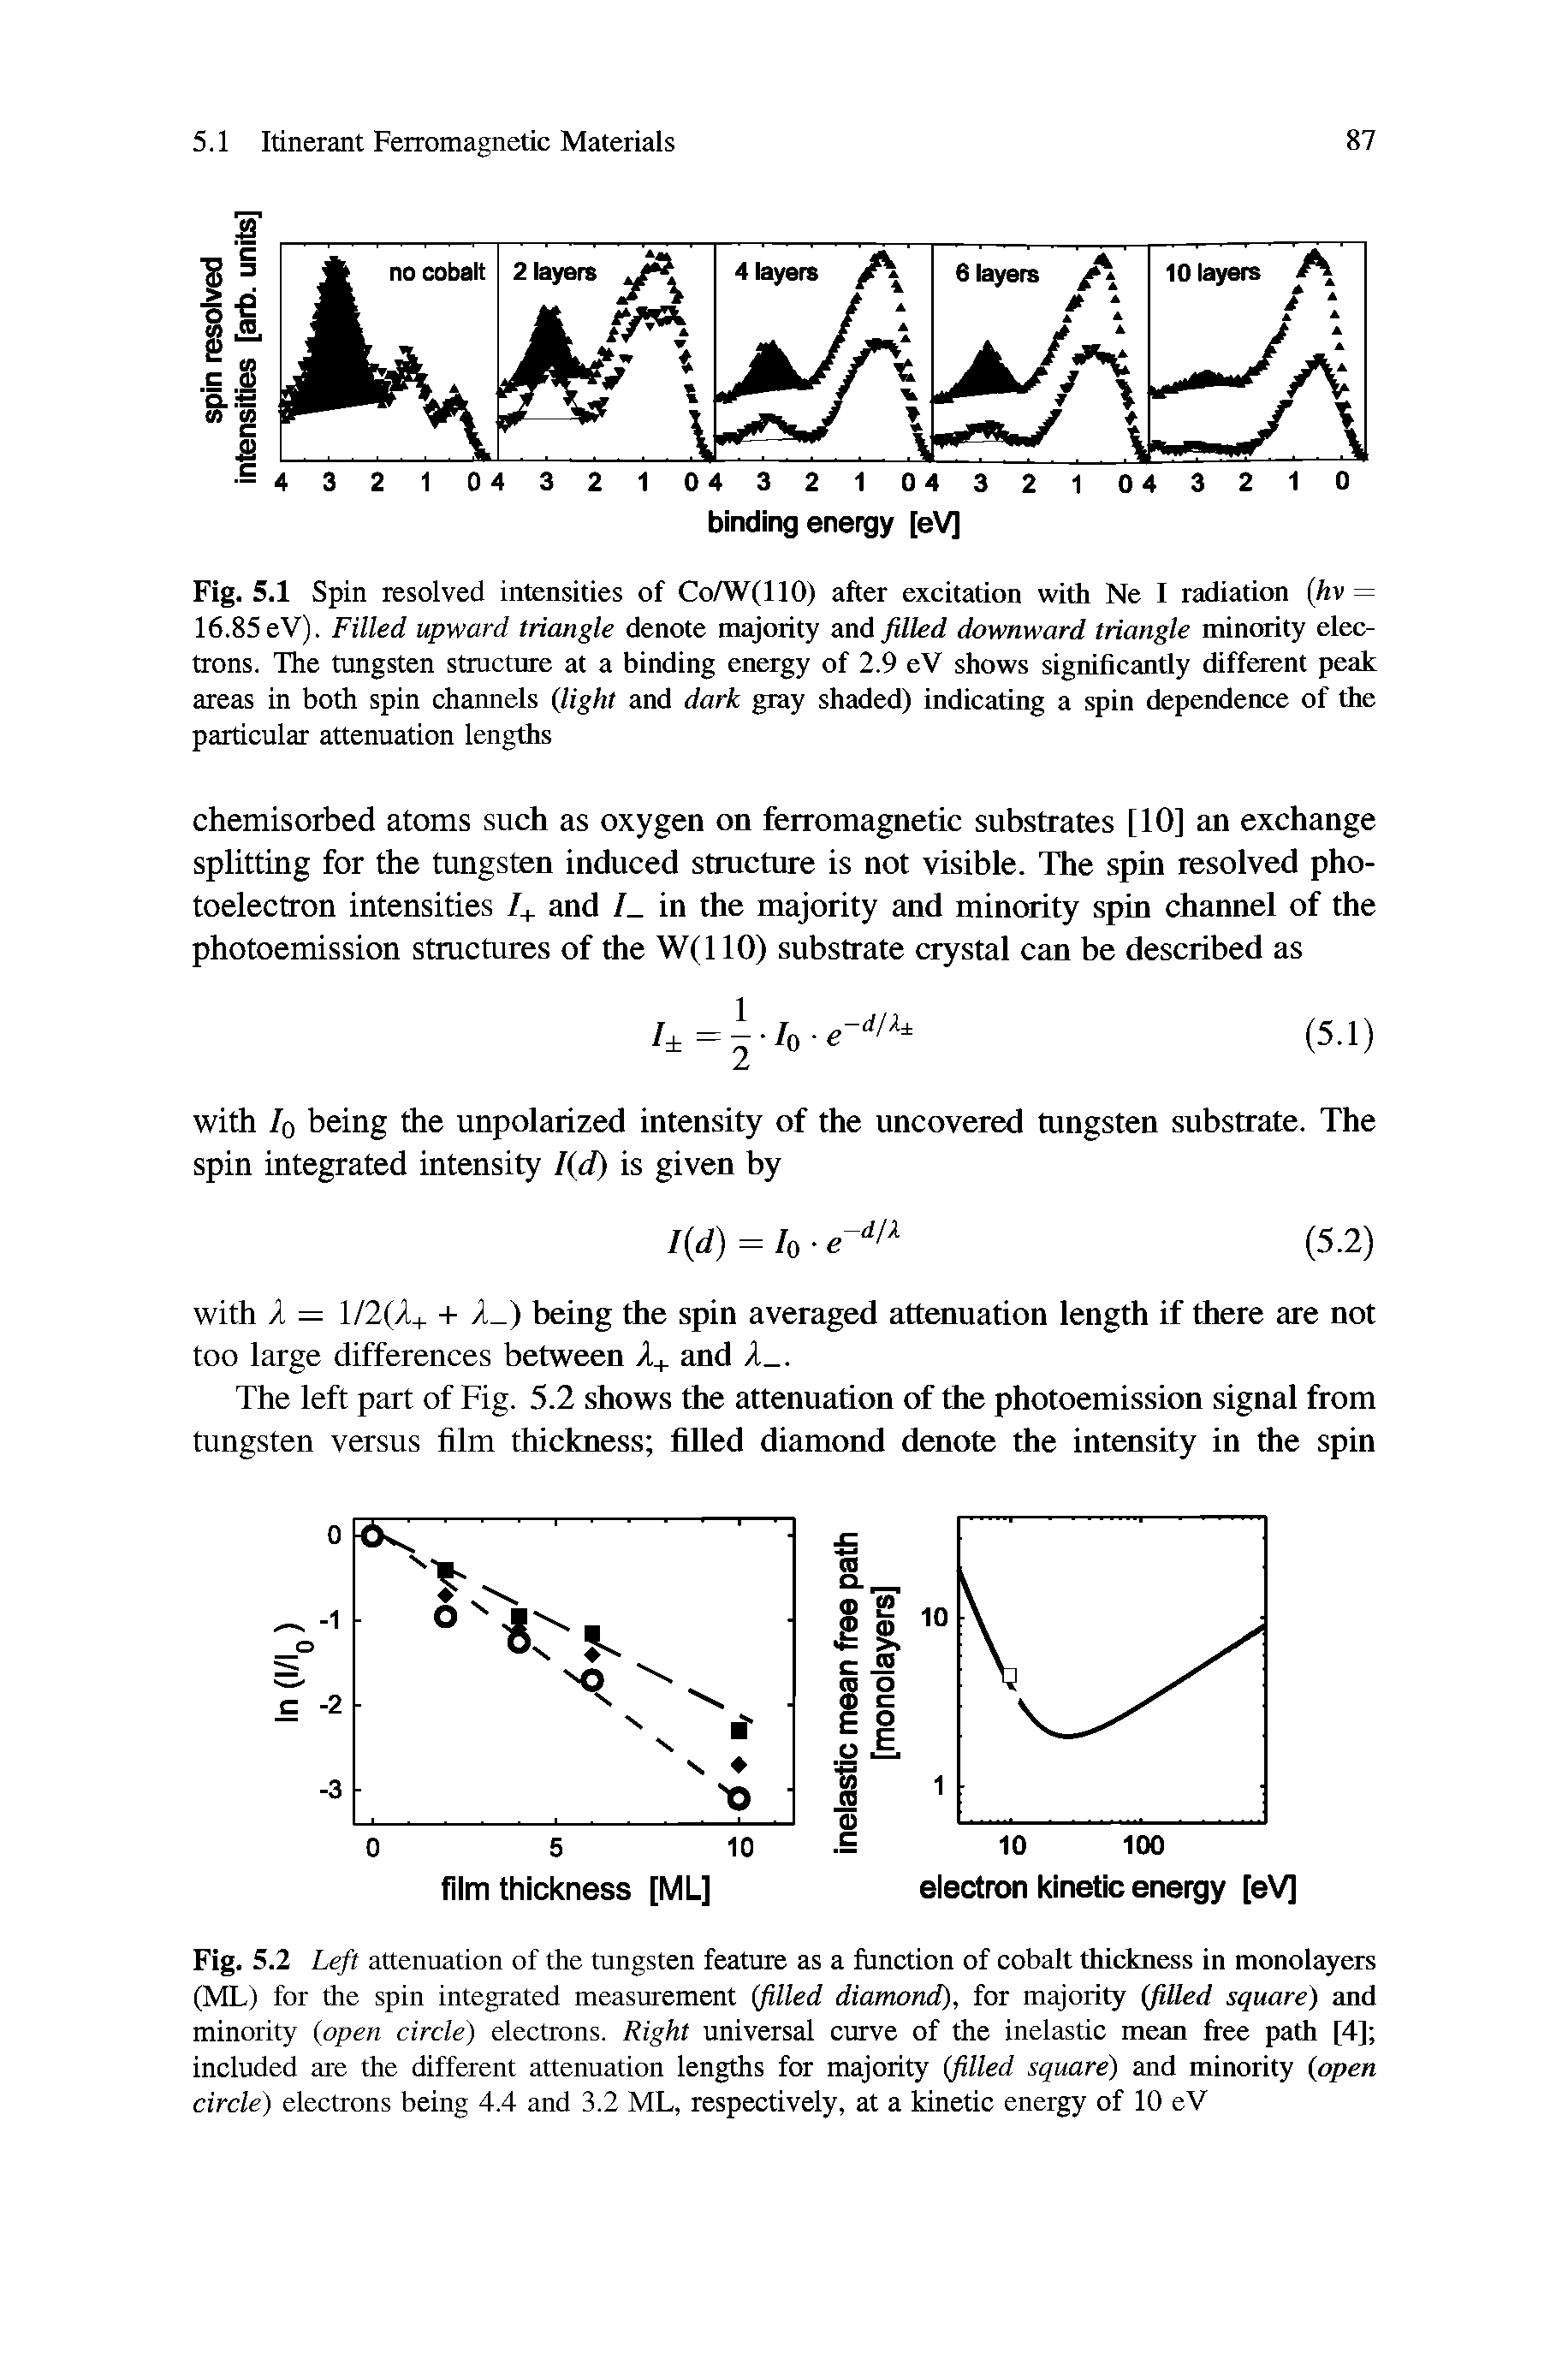 Fig. 5.1 Spin resolved intensities of Co/W(110) after excitation with Ne I radiation hv = 16.85 eV). Filled upward triangle denote majority and filled downward triangle minraity electrons. The tungsten structure at a binding energy of 2.9 eV shows significantly different peak areas in both spin channels (light and dark gray shaded) indicating a spin dependence of the particular attenuation lengths...